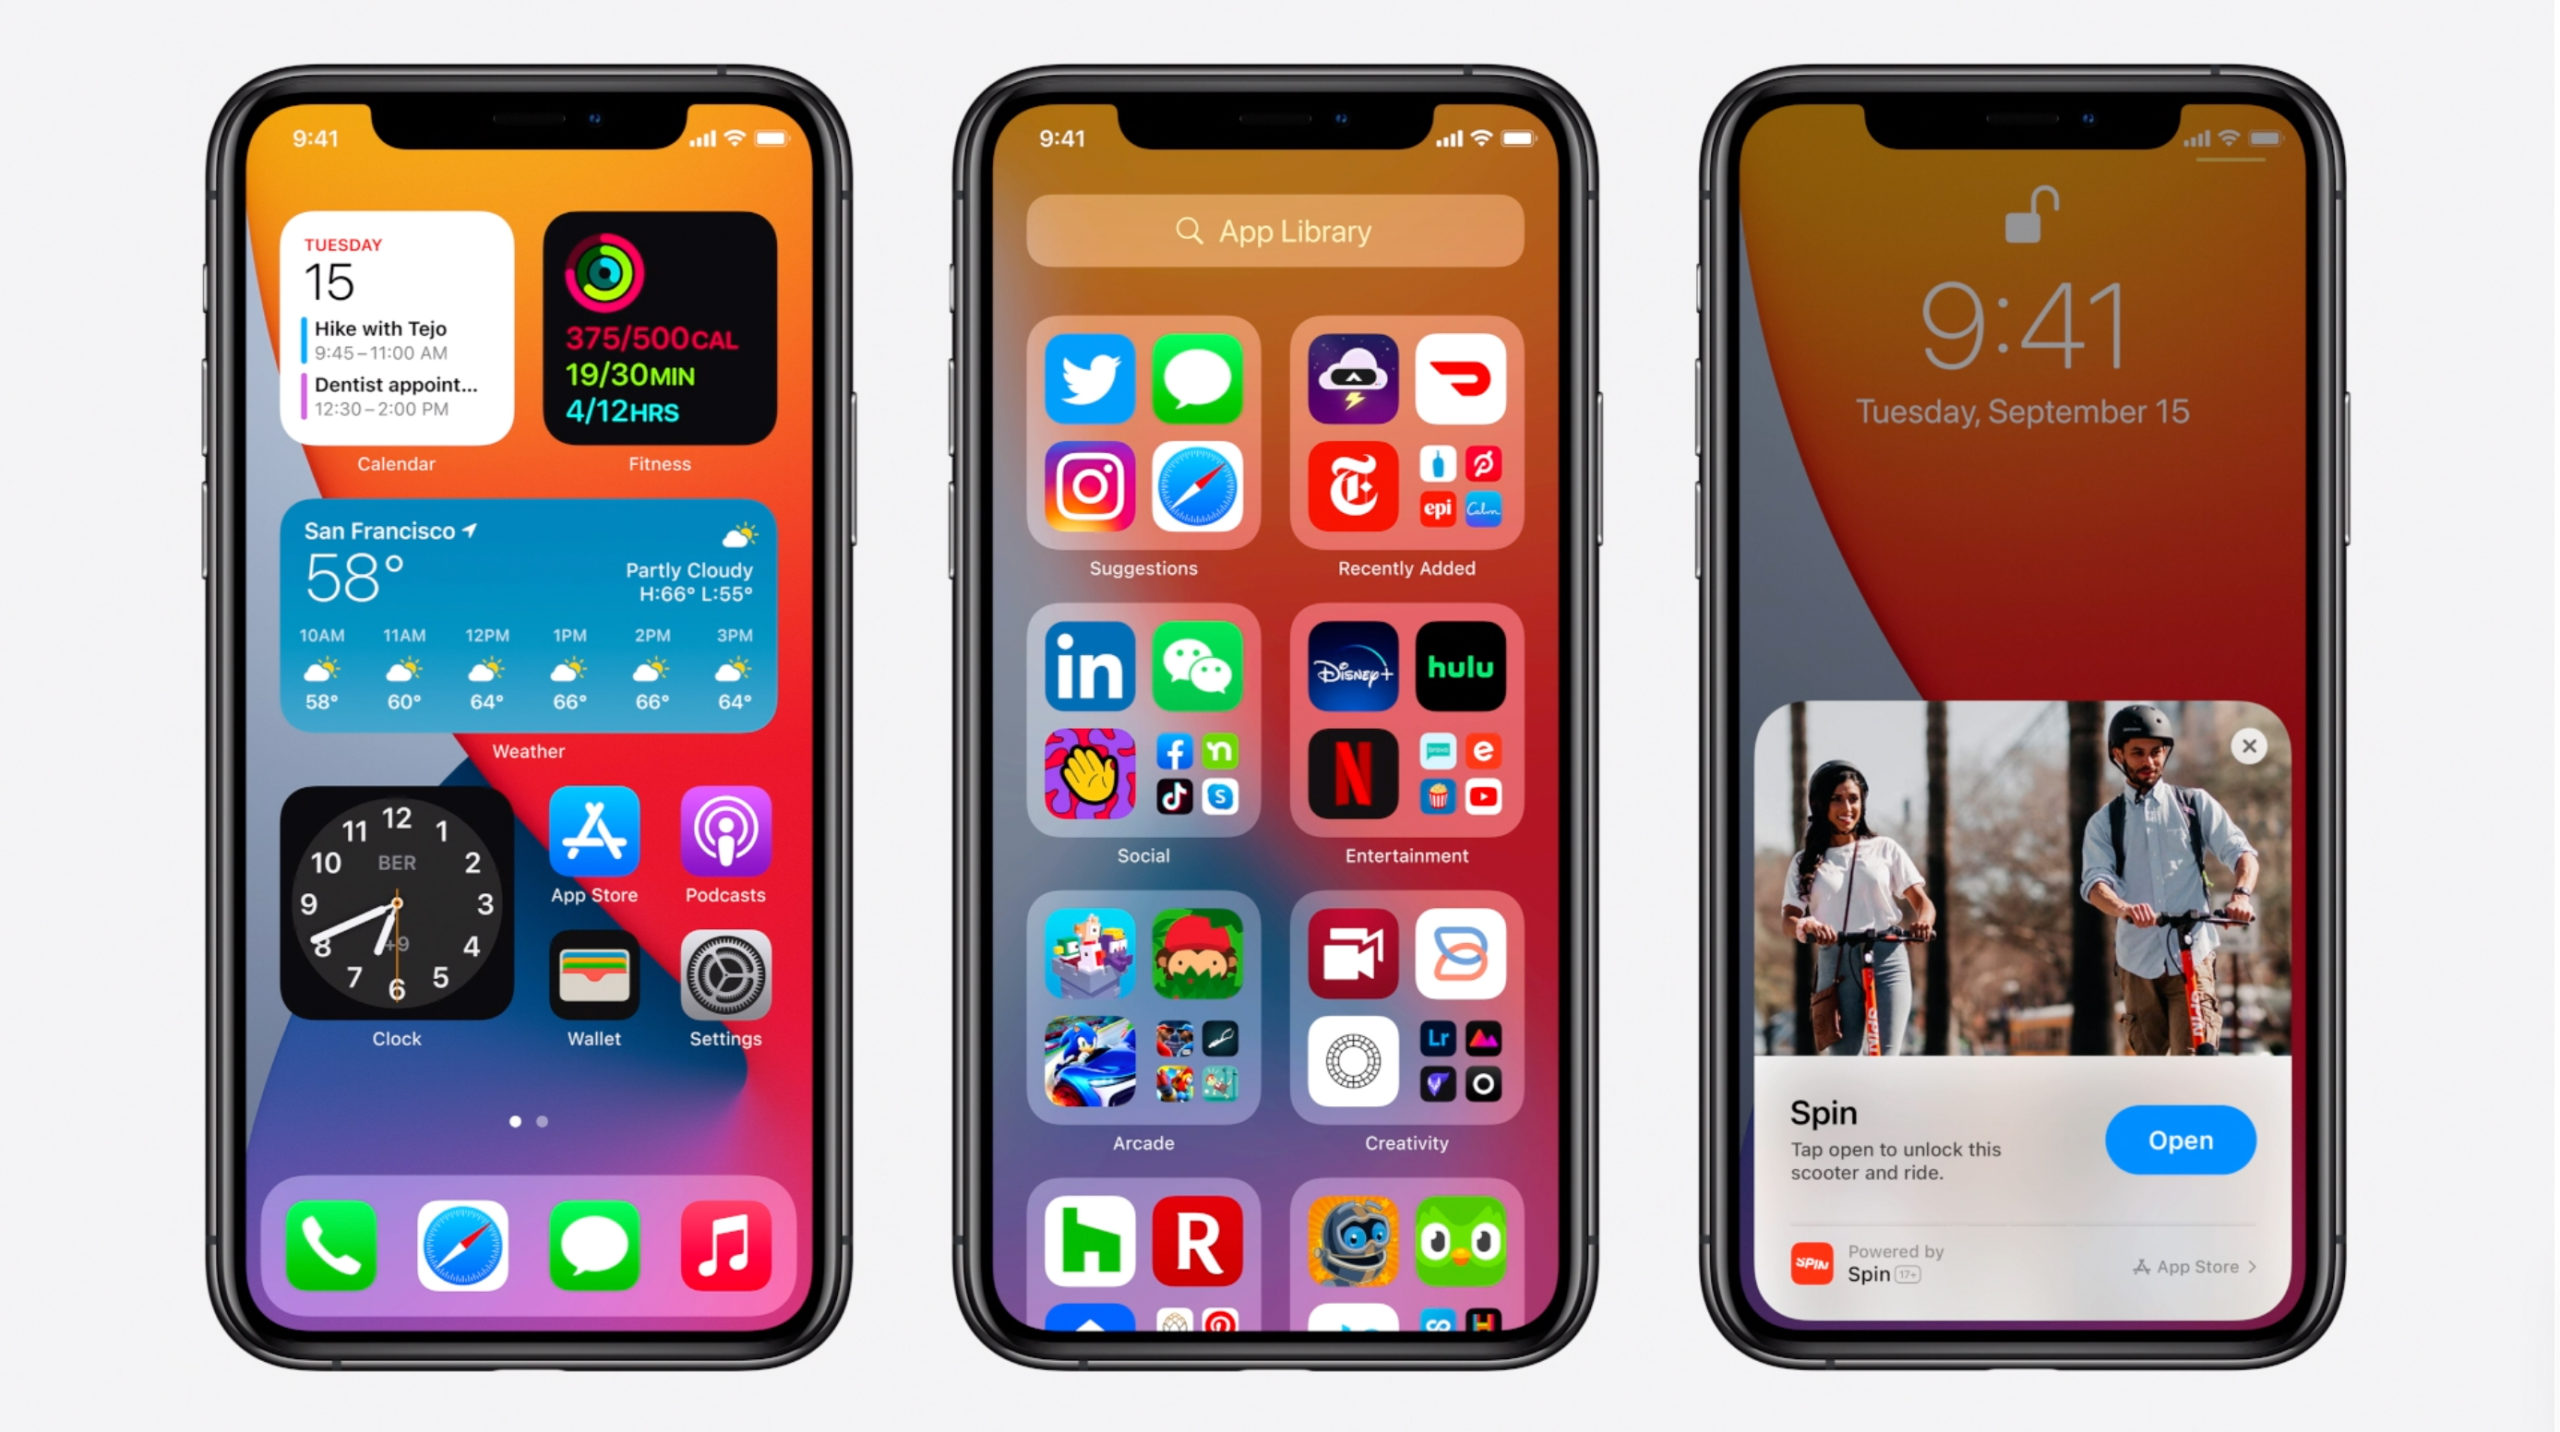 Everything you need to know about the iOS 14 update